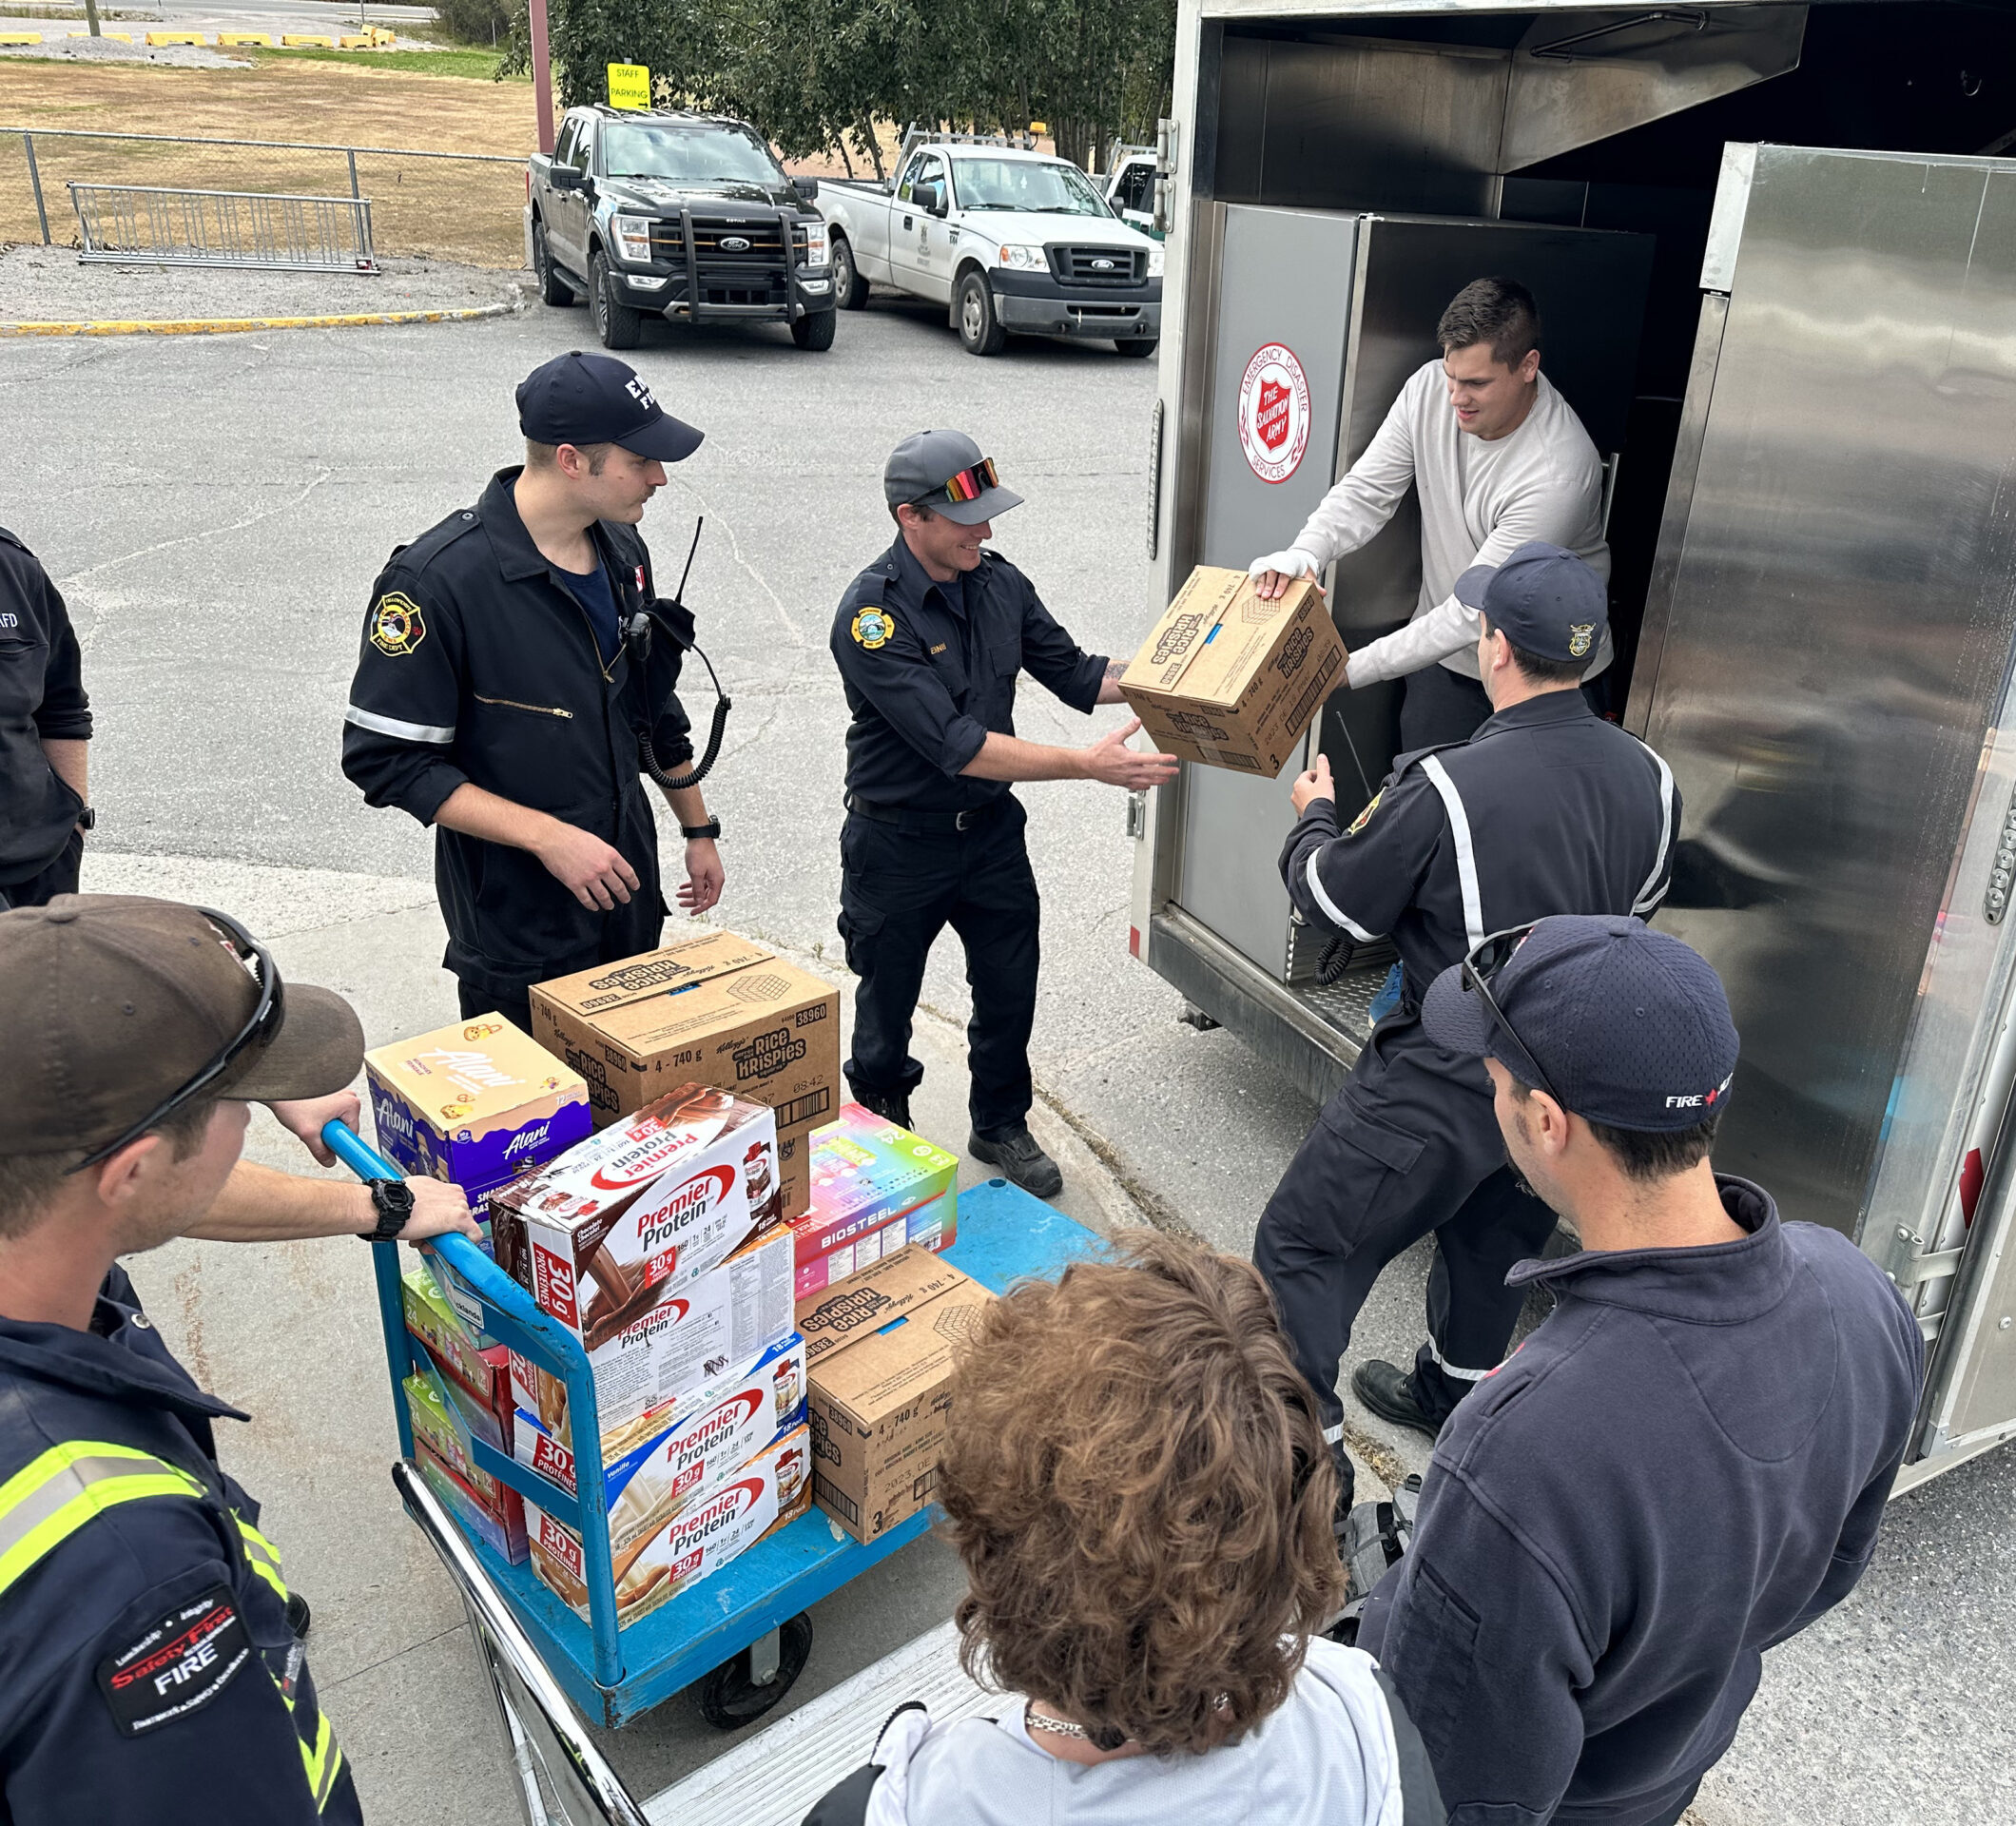 EDS hands out supplies to first responders in Yellowknife